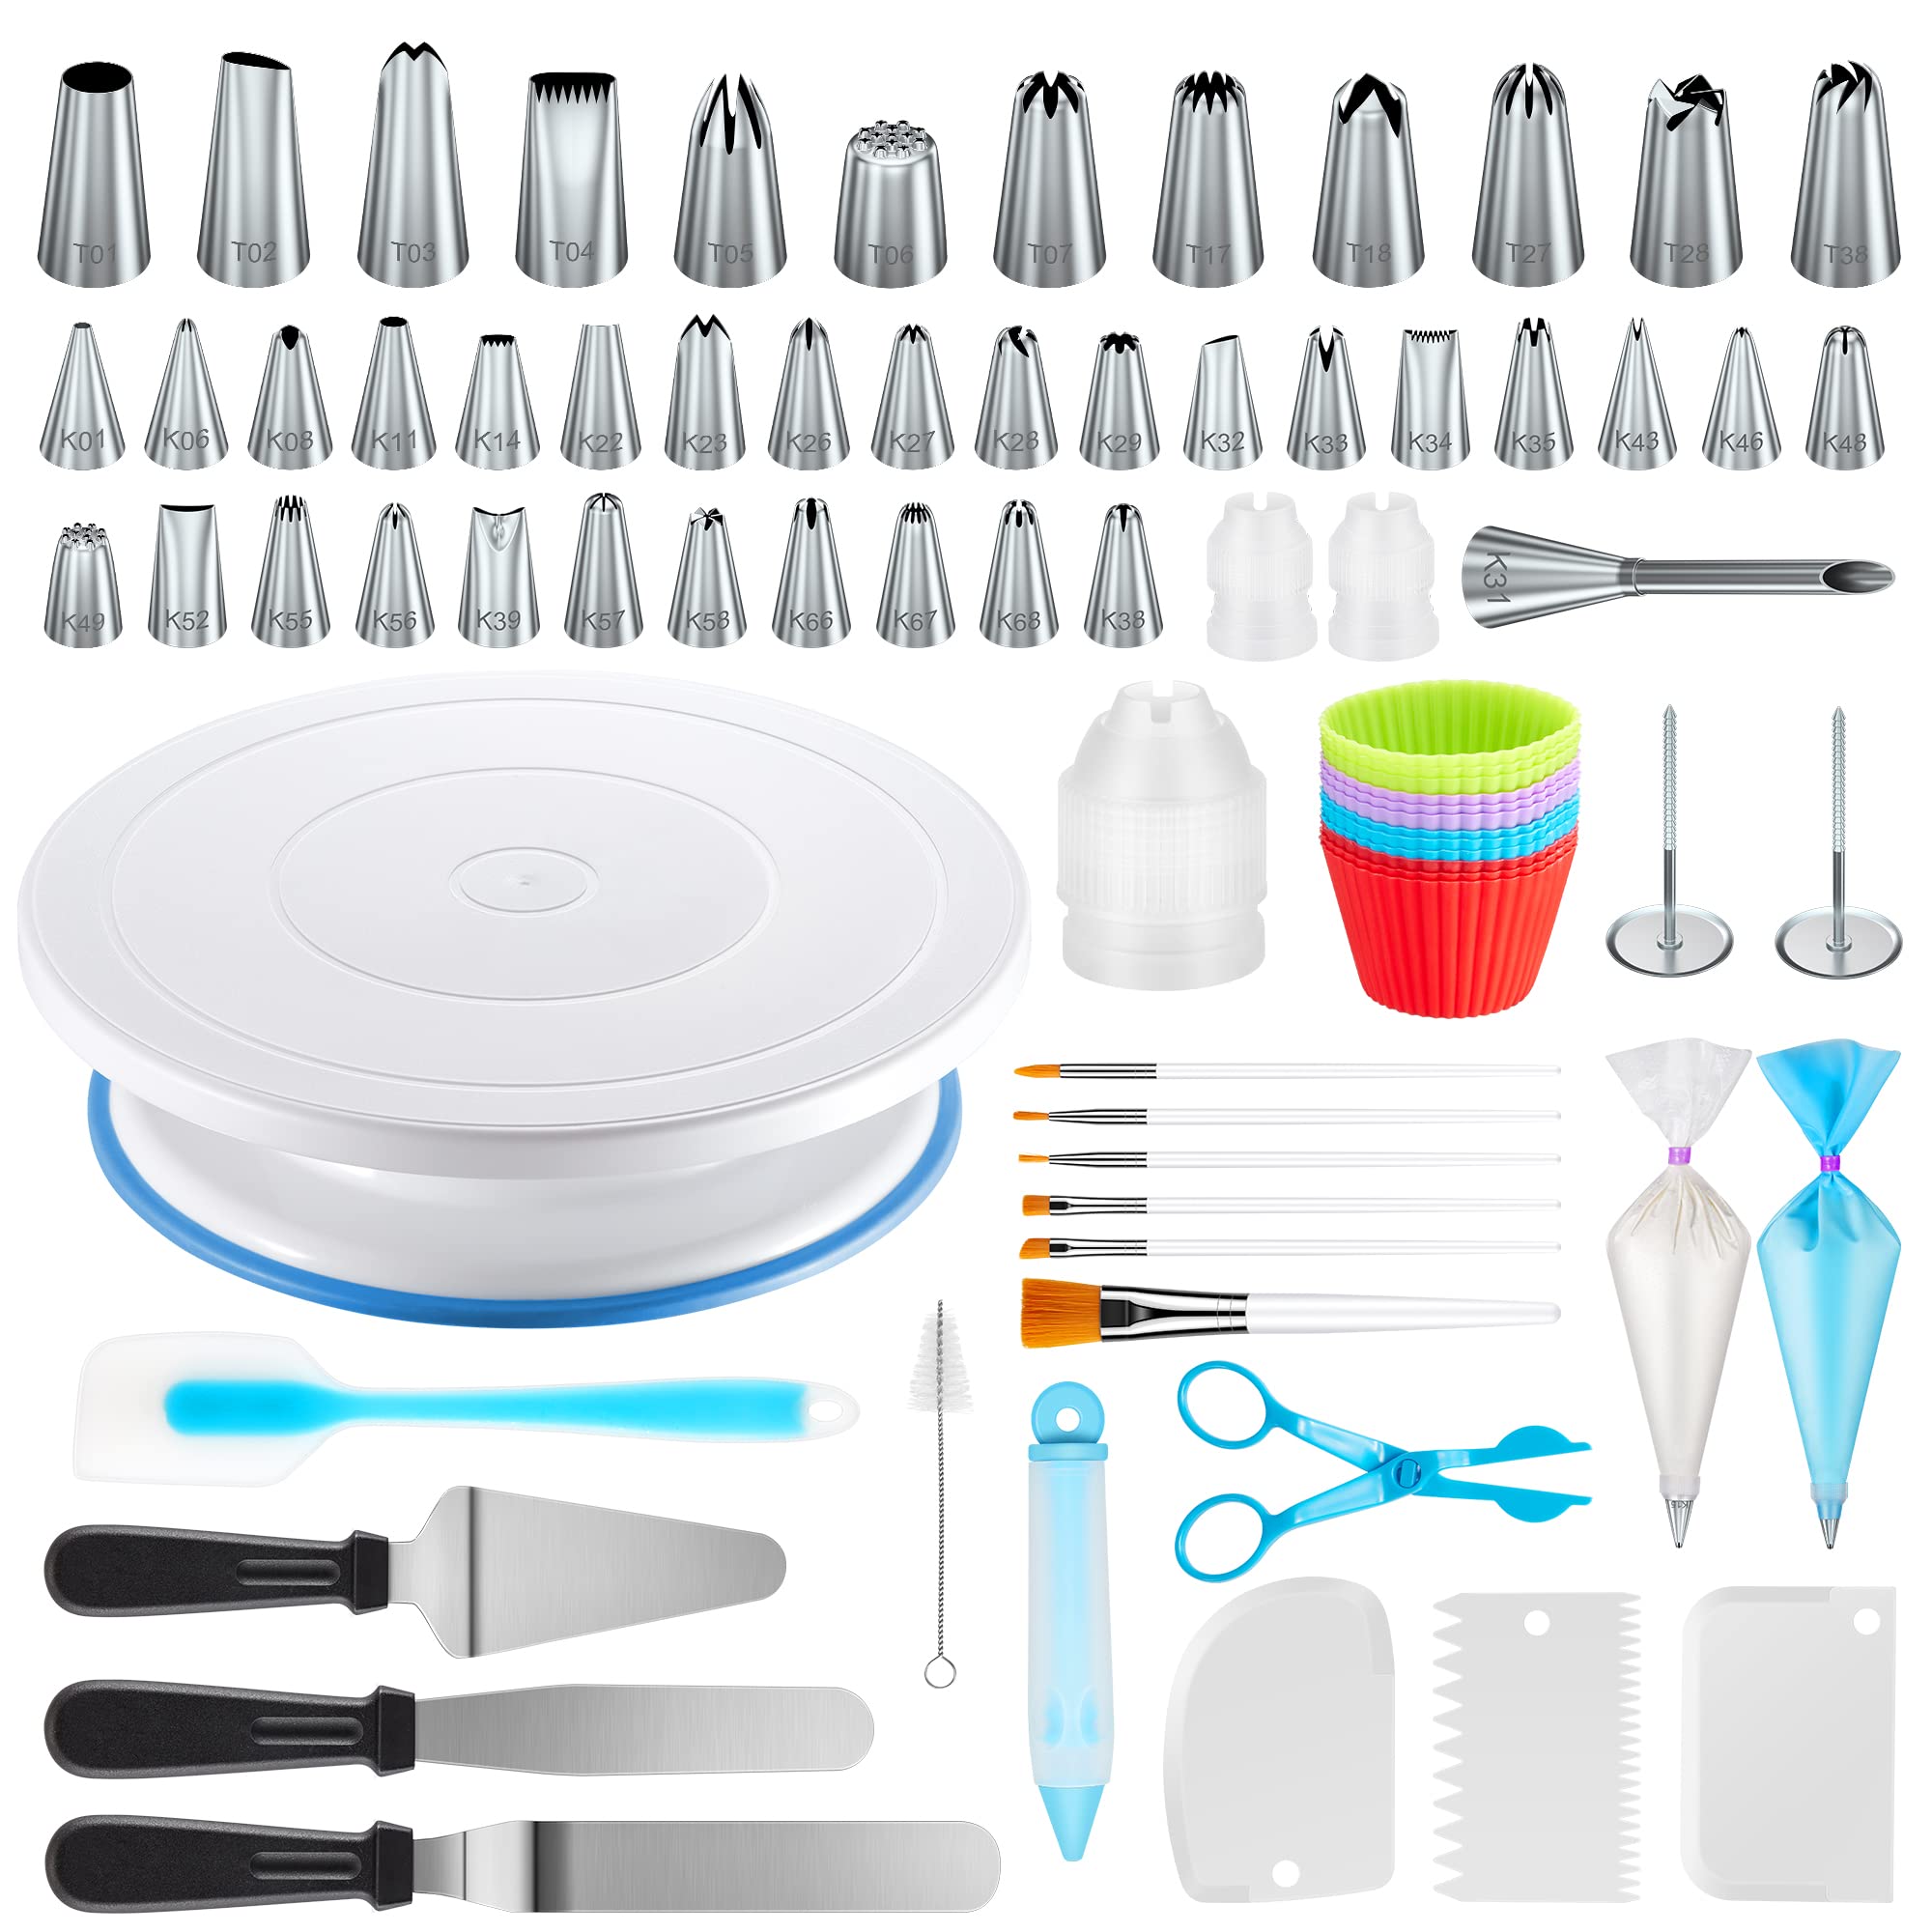 Kootek 178 Pcs Cake Decorating Kit Supplies with Cake Turntable Numbered Piping Tips E-book Guide Pastry Bags Frosting Spatula Icing Smoother Decoration Pen Cake Paint Brush Silicone Baking Cups